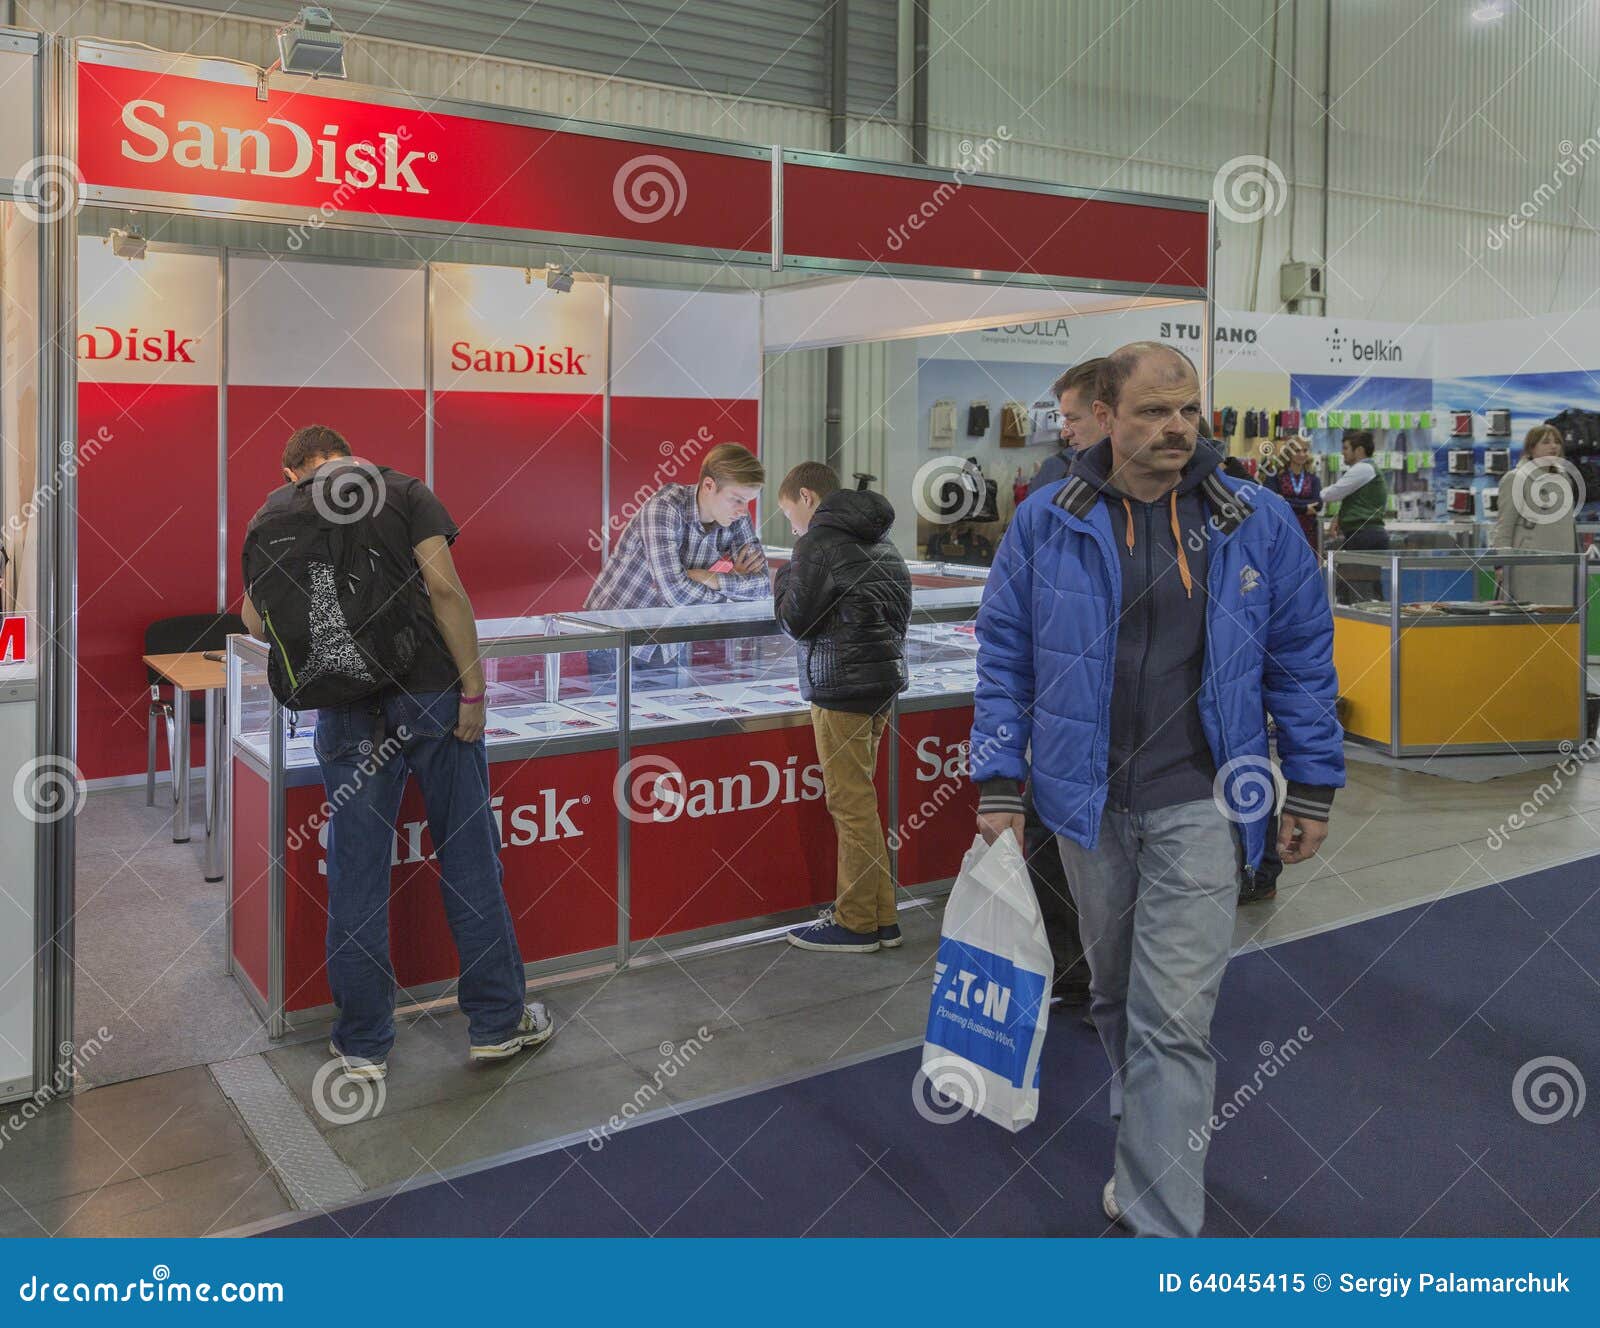 sandisk-company-booth-at-cee-2015-the-largest-electronics-trade-show-in-ukraine-editorial-image